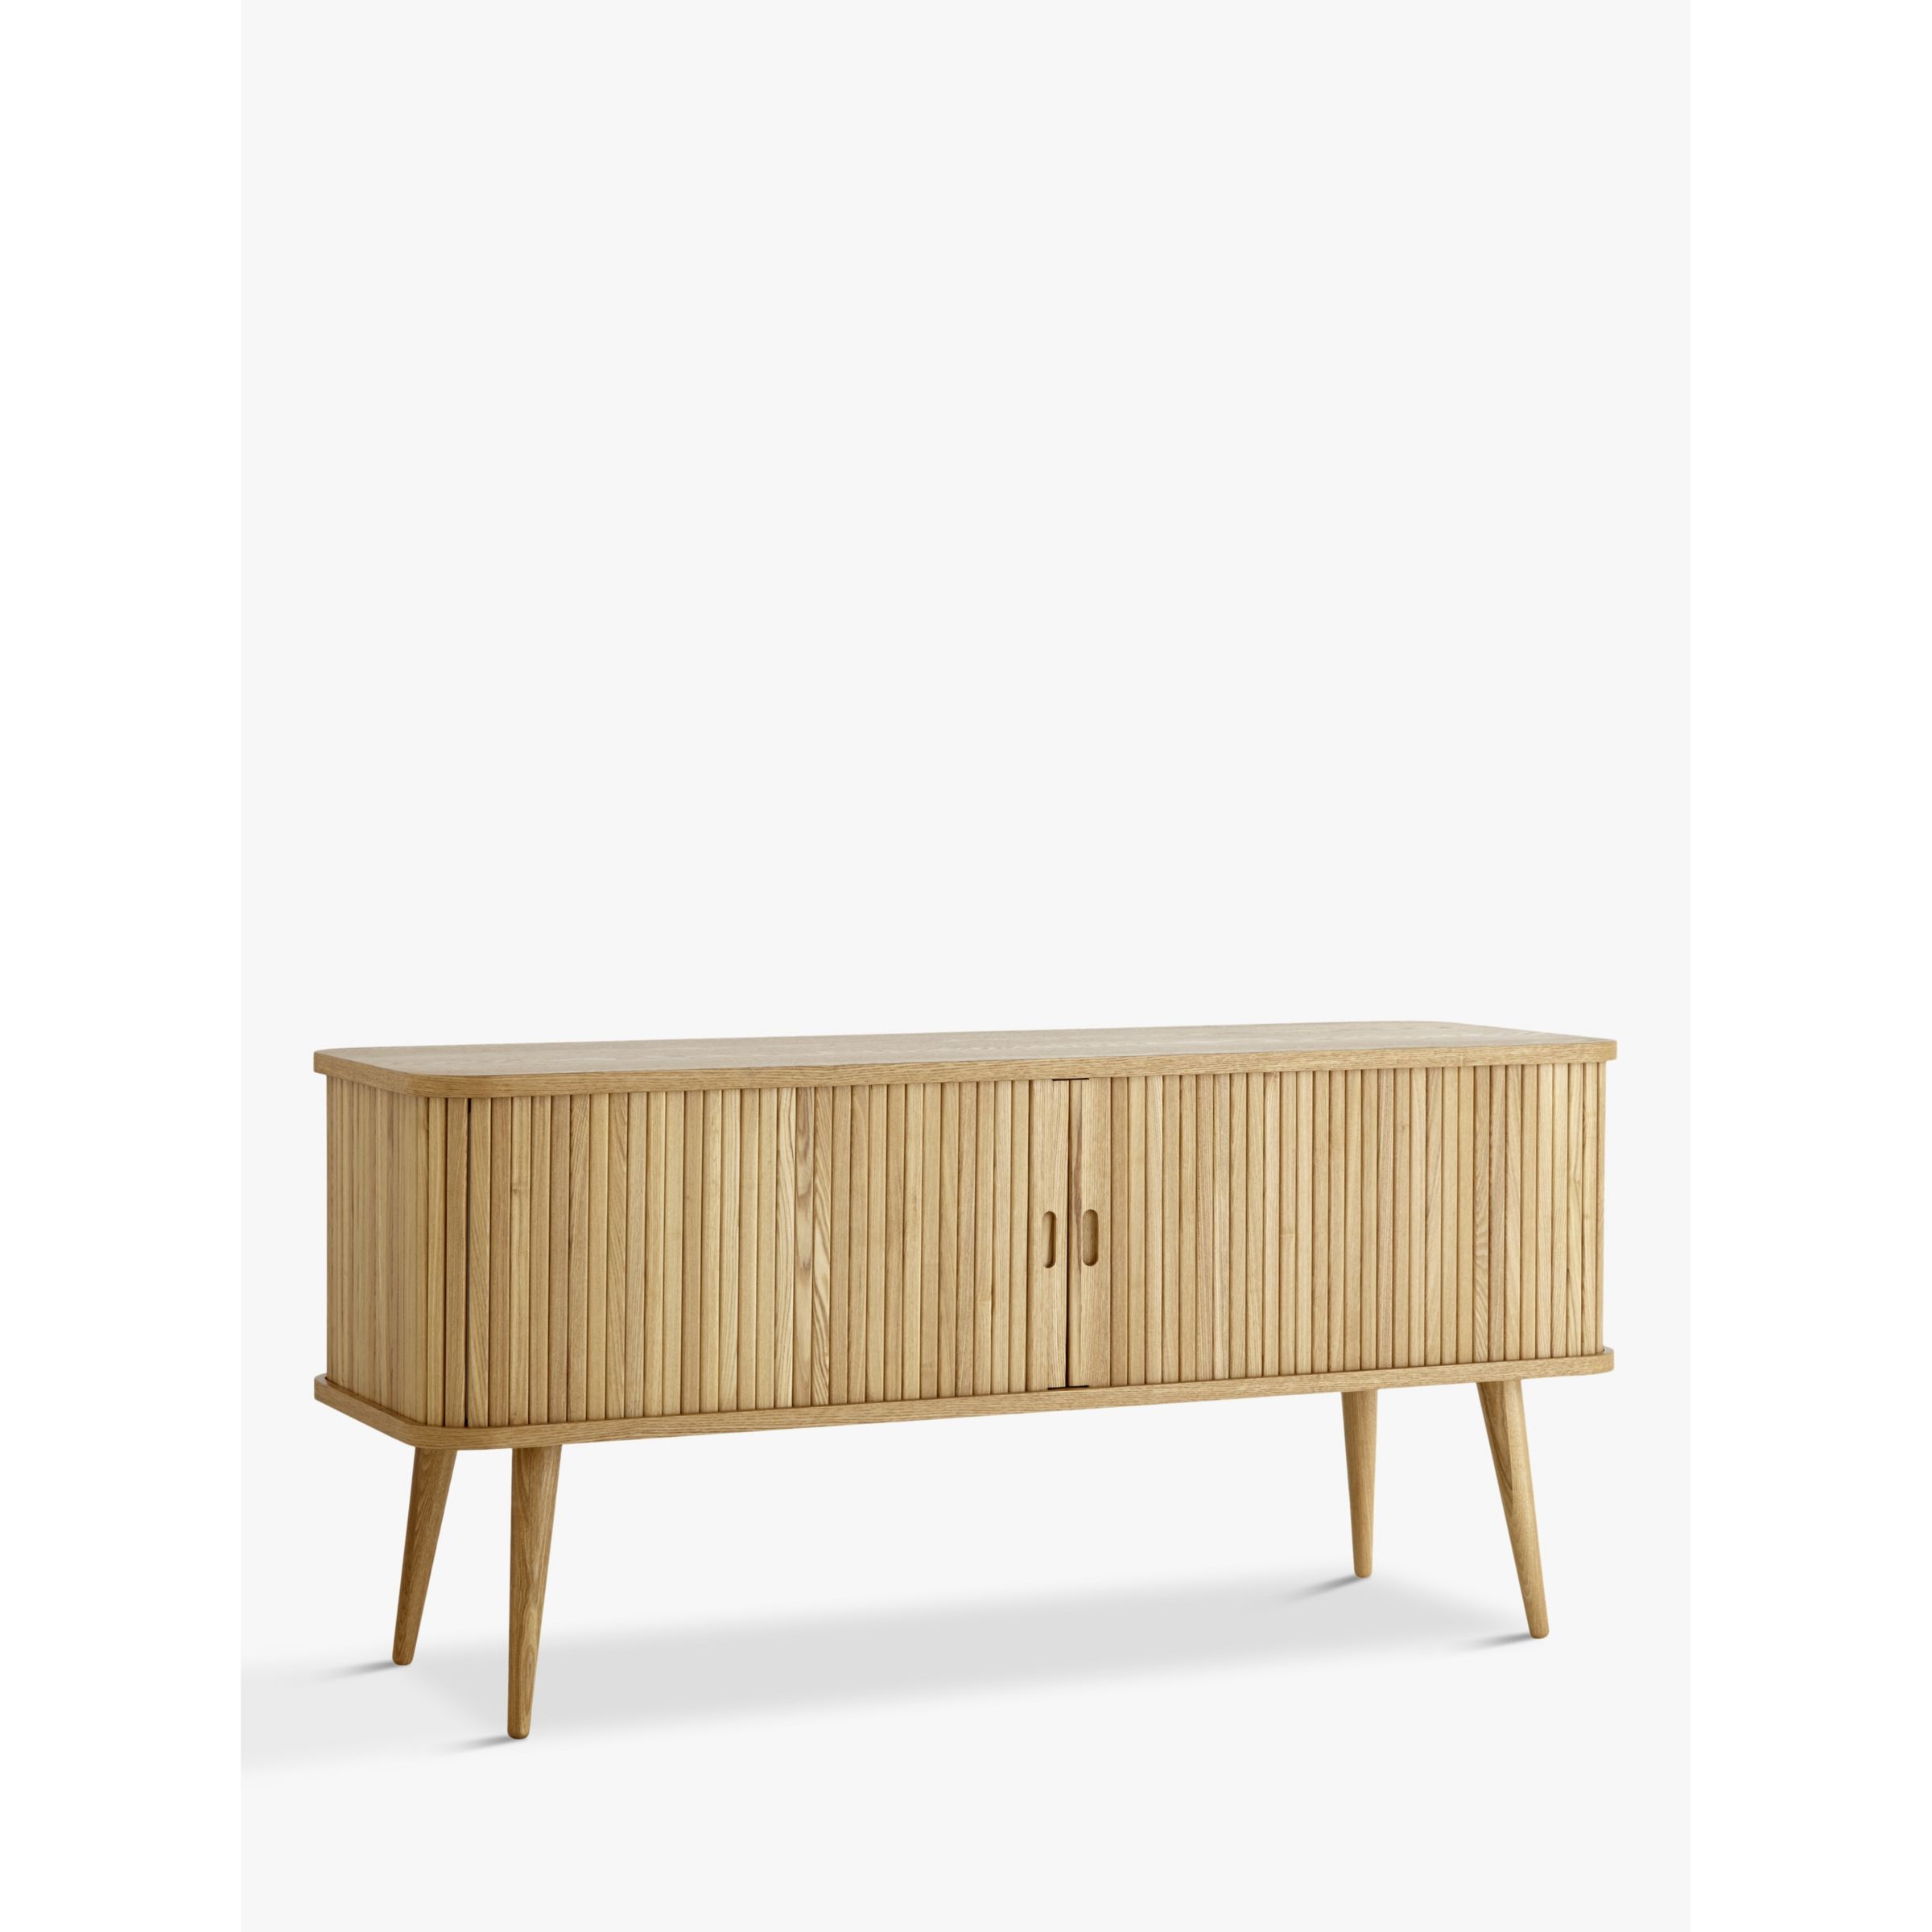 Photo of John lewis grayson tv stand sideboard for tvs up to 60